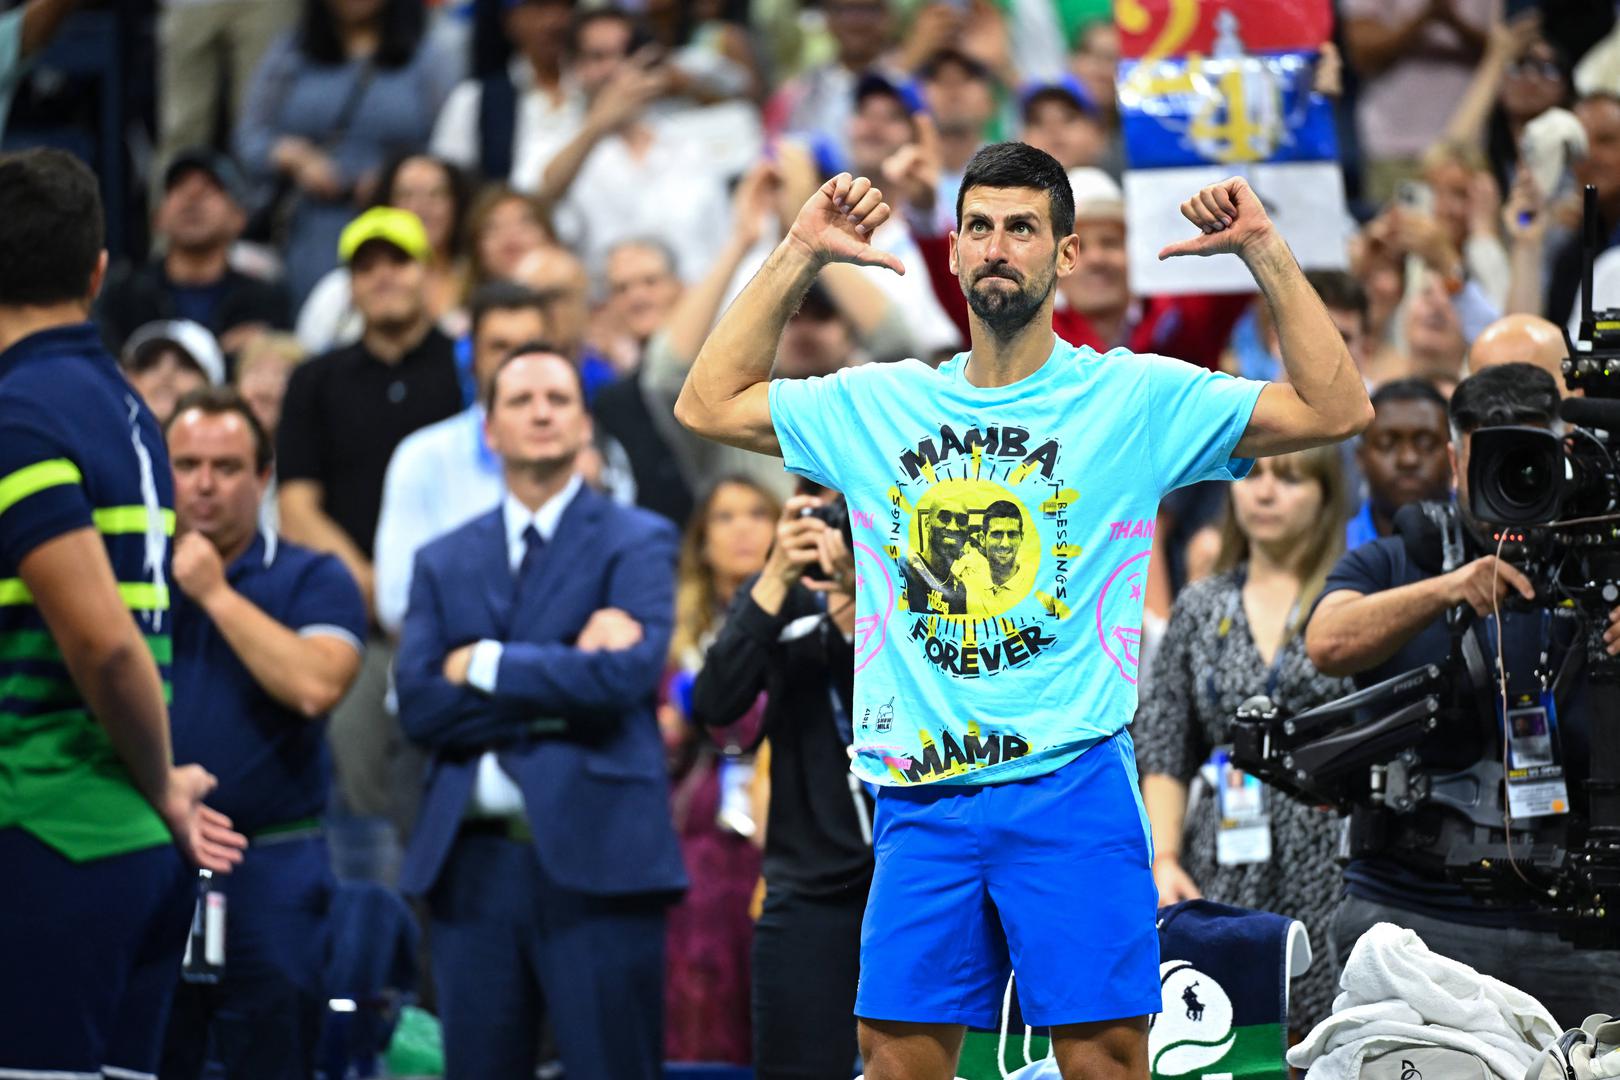 Novak Djokovic (SRB) wins his 24th Grans Slam at the 2023 US Open at Billie Jean National Tennis Center in New York City, NY, USA, on September 10, 2023. Photo by Corinne Dubreuil/ABACAPRESS.COM Photo: Dubreuil Corinne/ABACA/ABACA